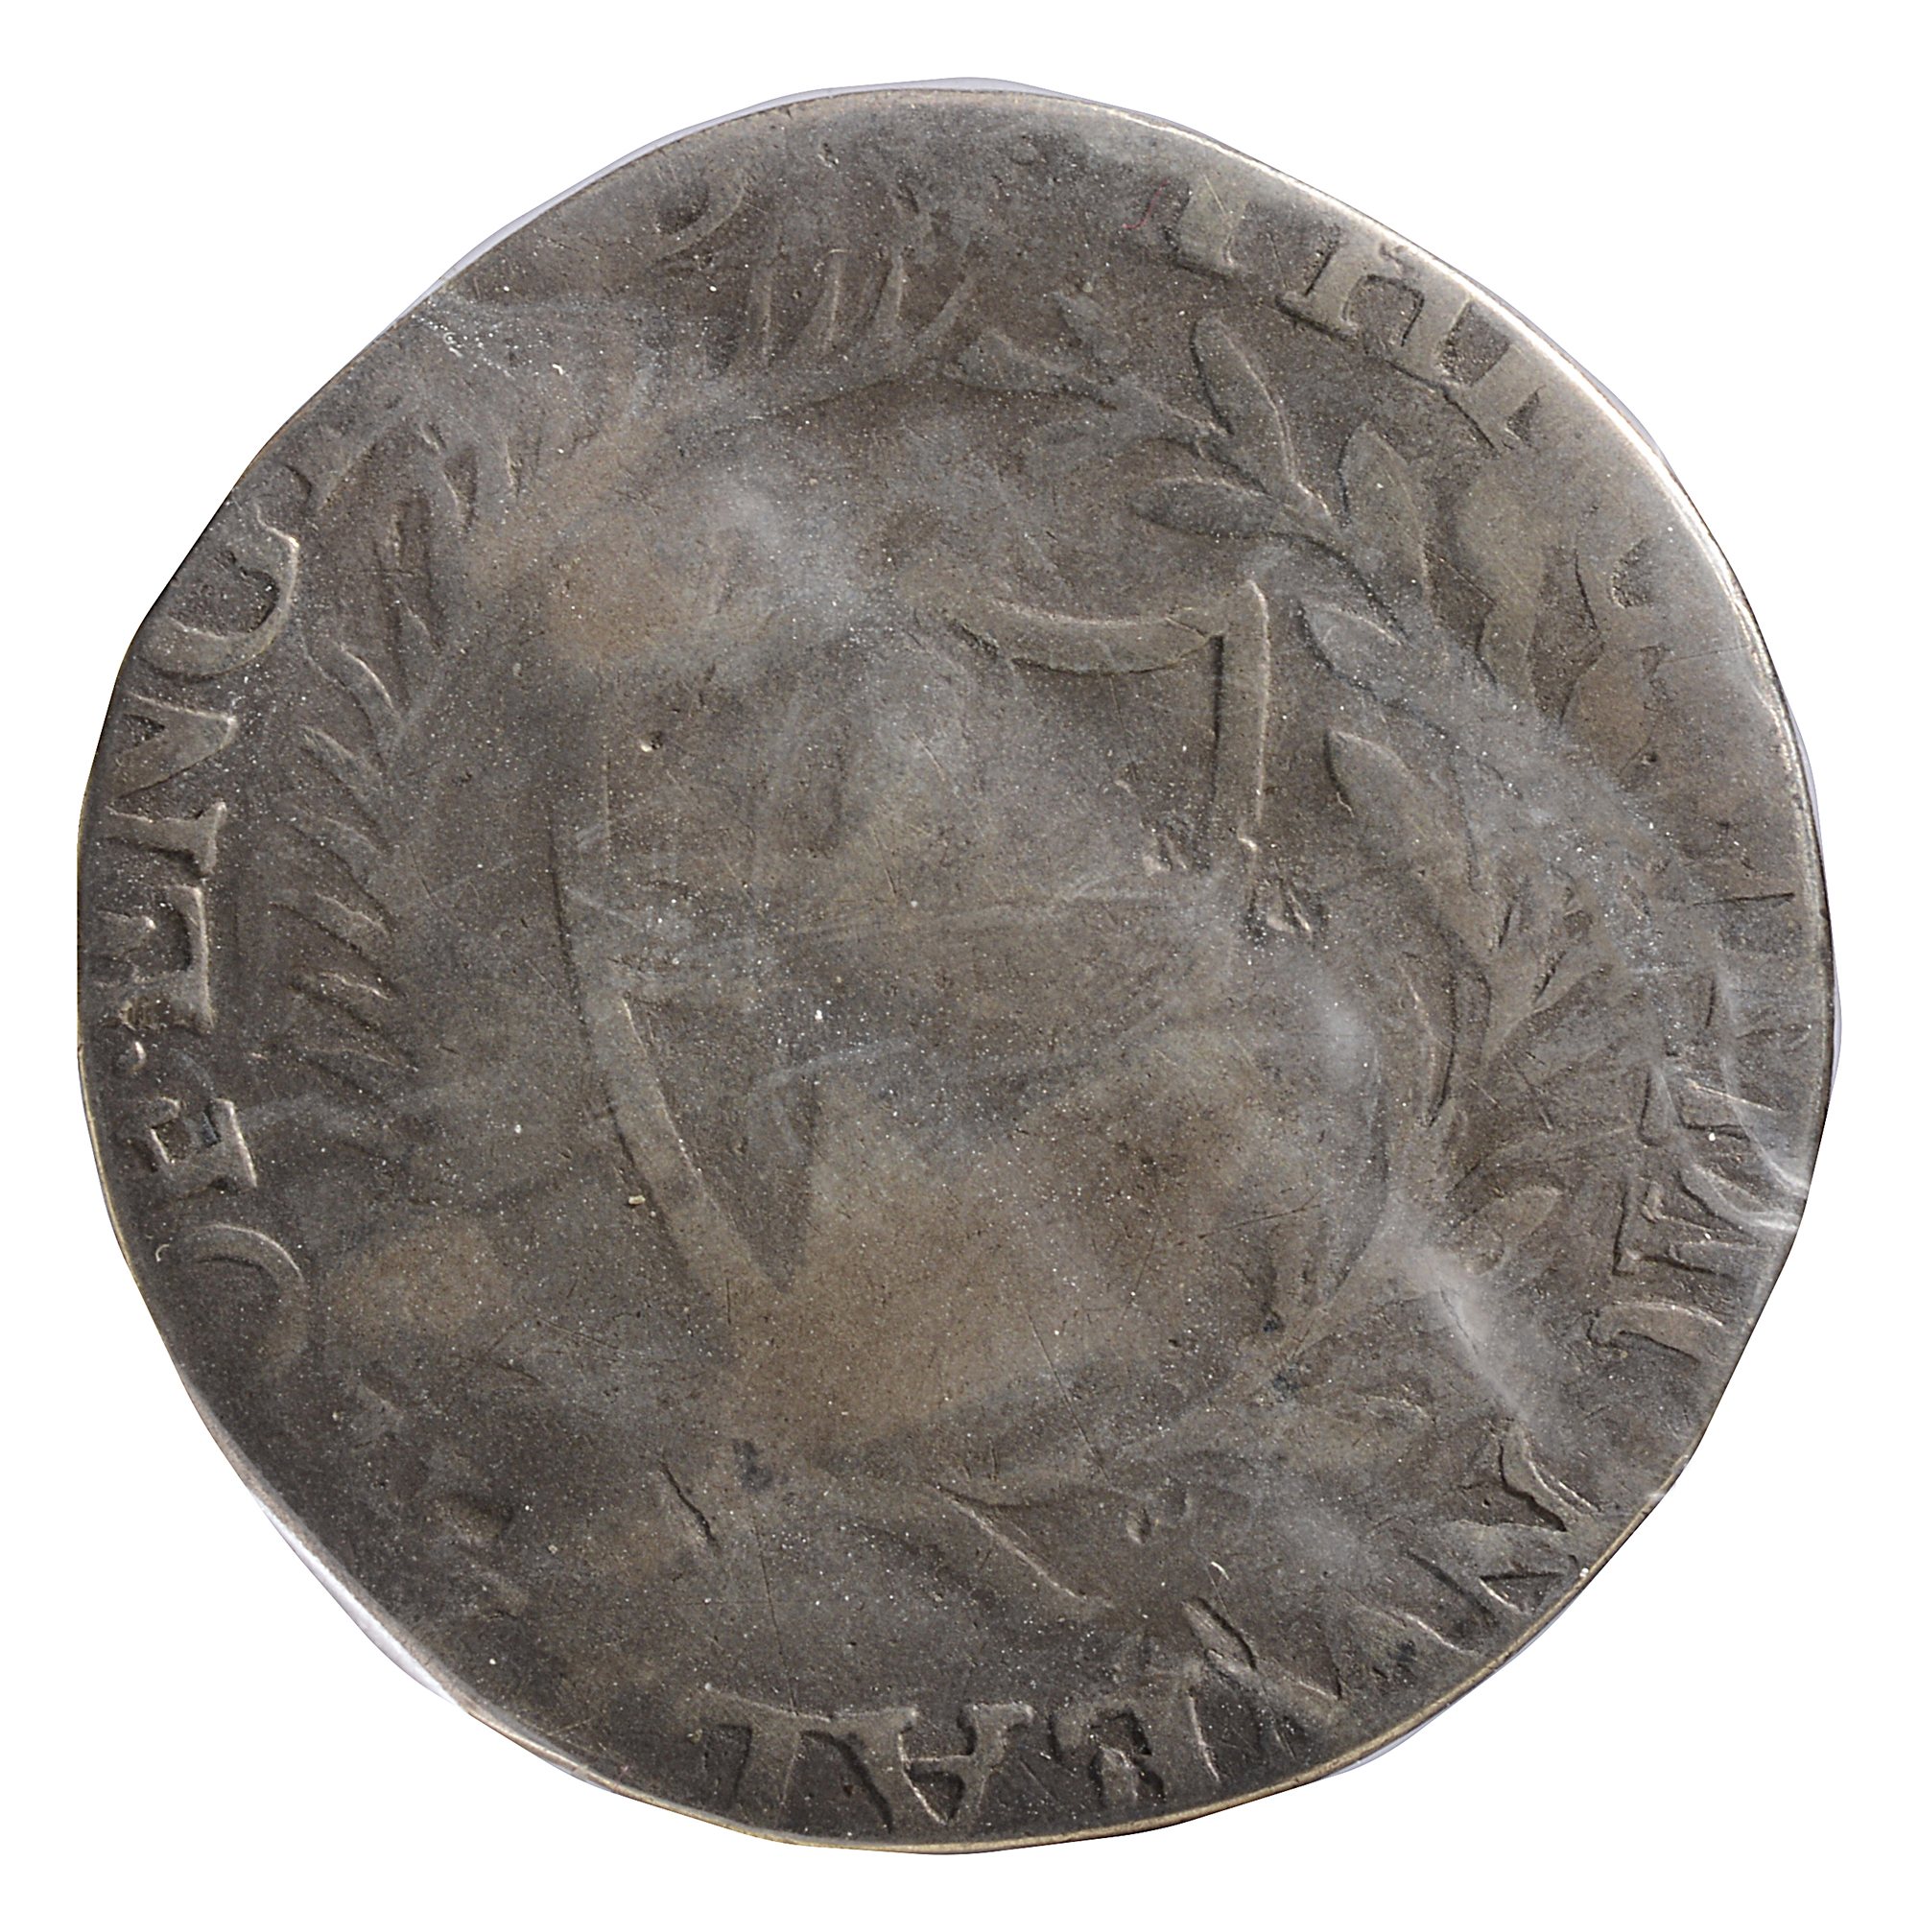 Commonwealth Silver Shilling1652.THE COMMONWEALTH OF ENGLAND, Shield of St. George in wreath of palm - Image 2 of 2